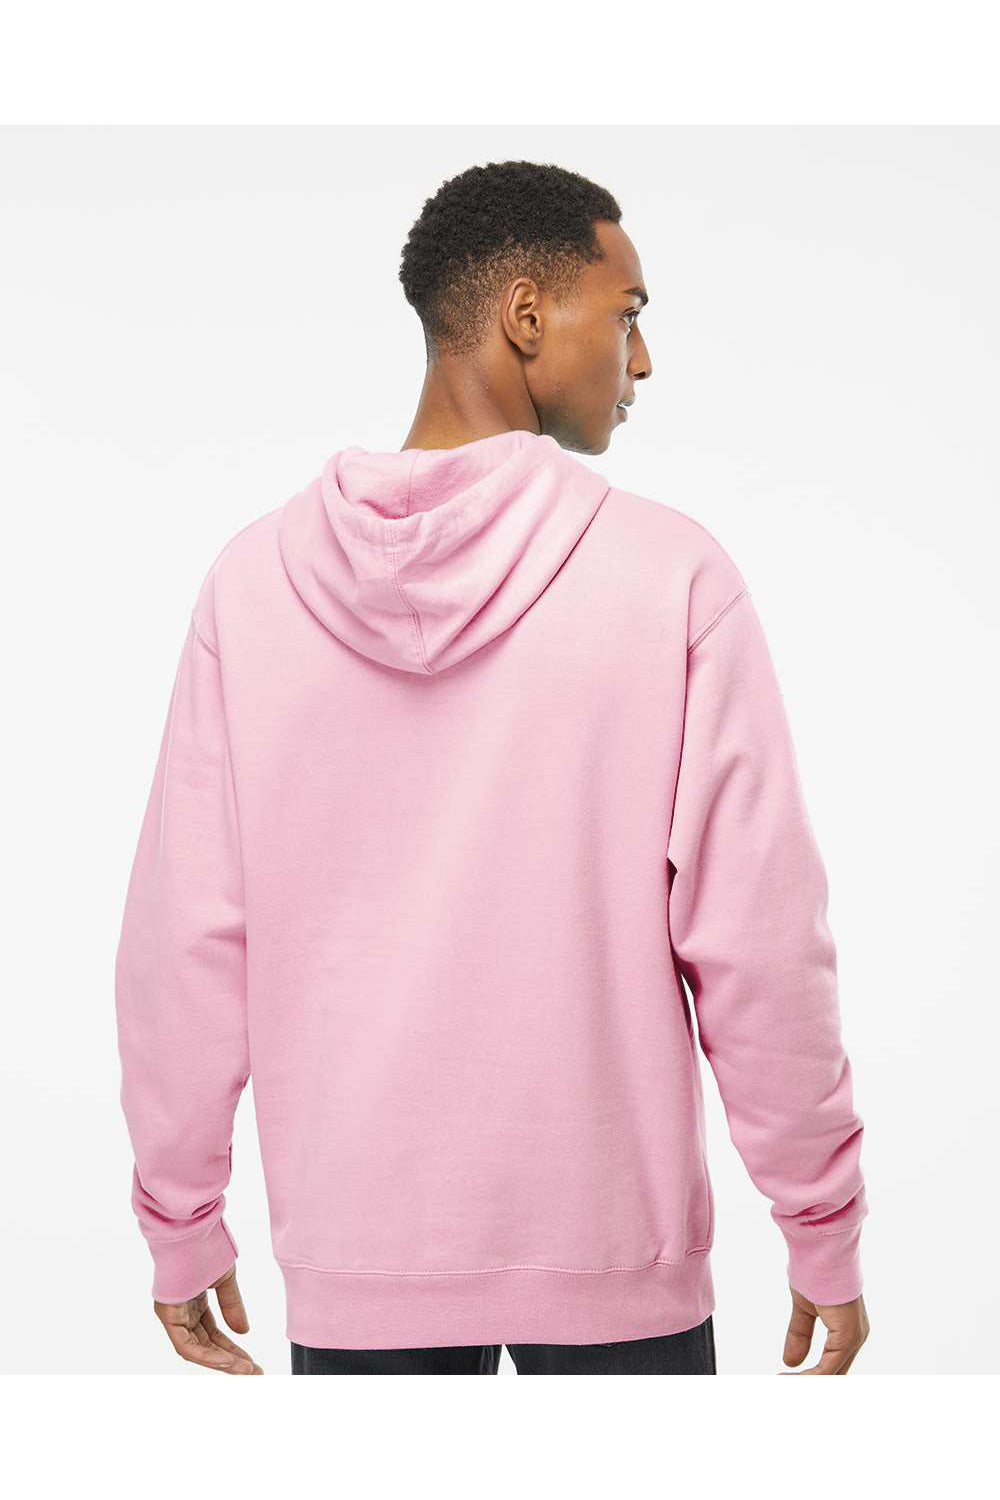 Independent Trading Co. SS4500 Mens Hooded Sweatshirt Hoodie Light Pink Model Back